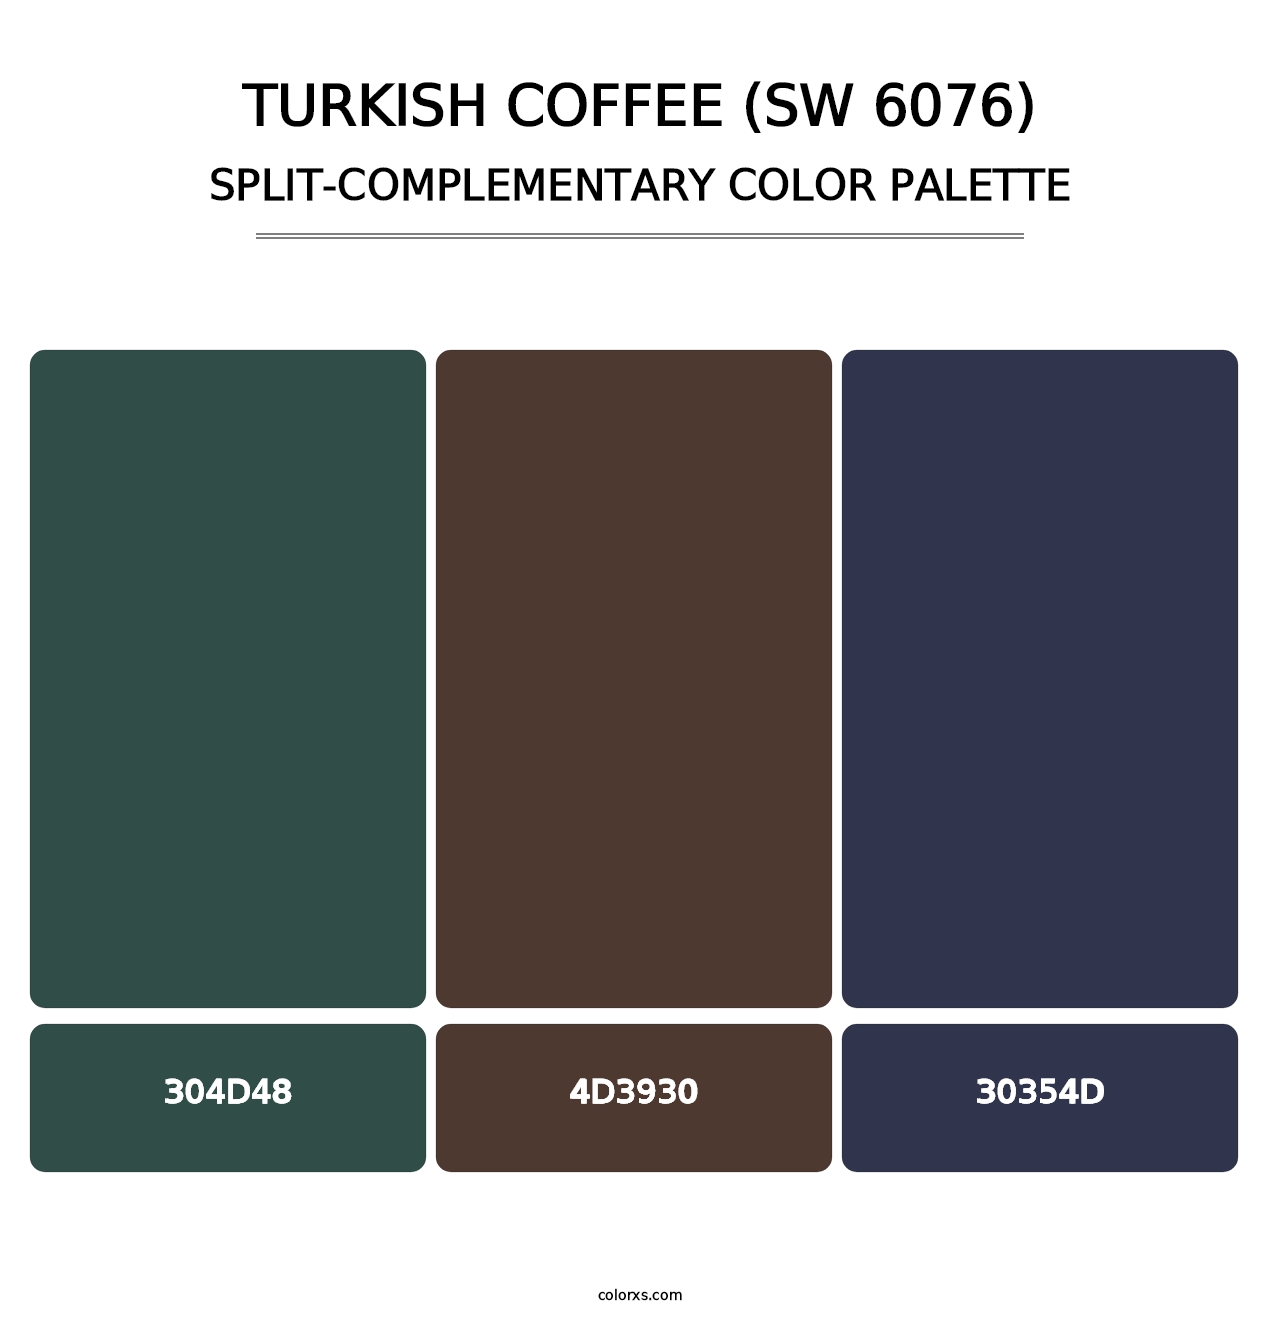 Turkish Coffee (SW 6076) - Split-Complementary Color Palette